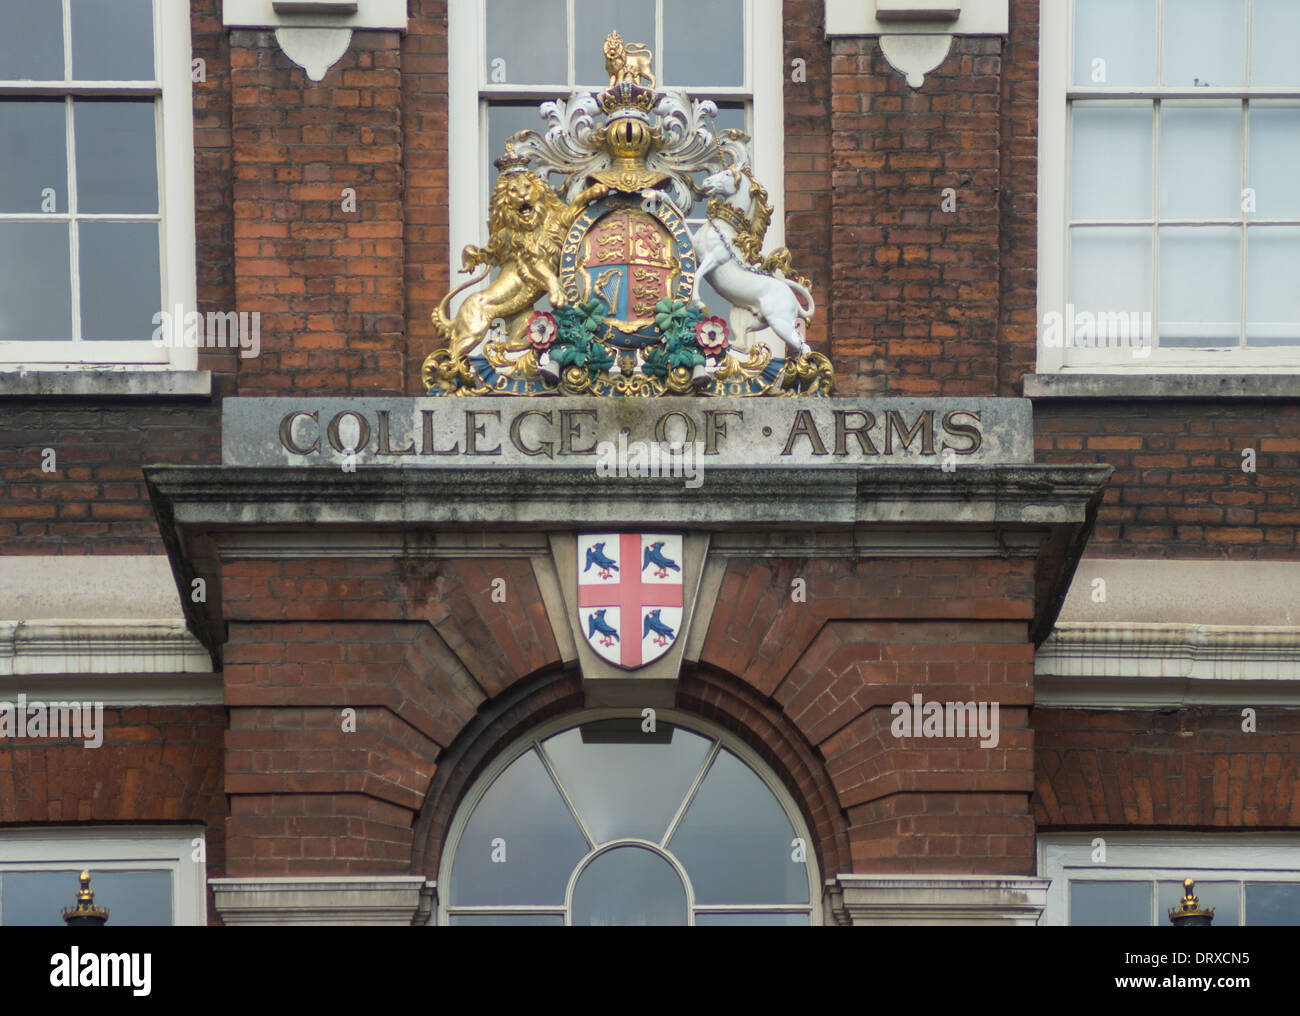 Das College of Arms in der City of london Stockfoto